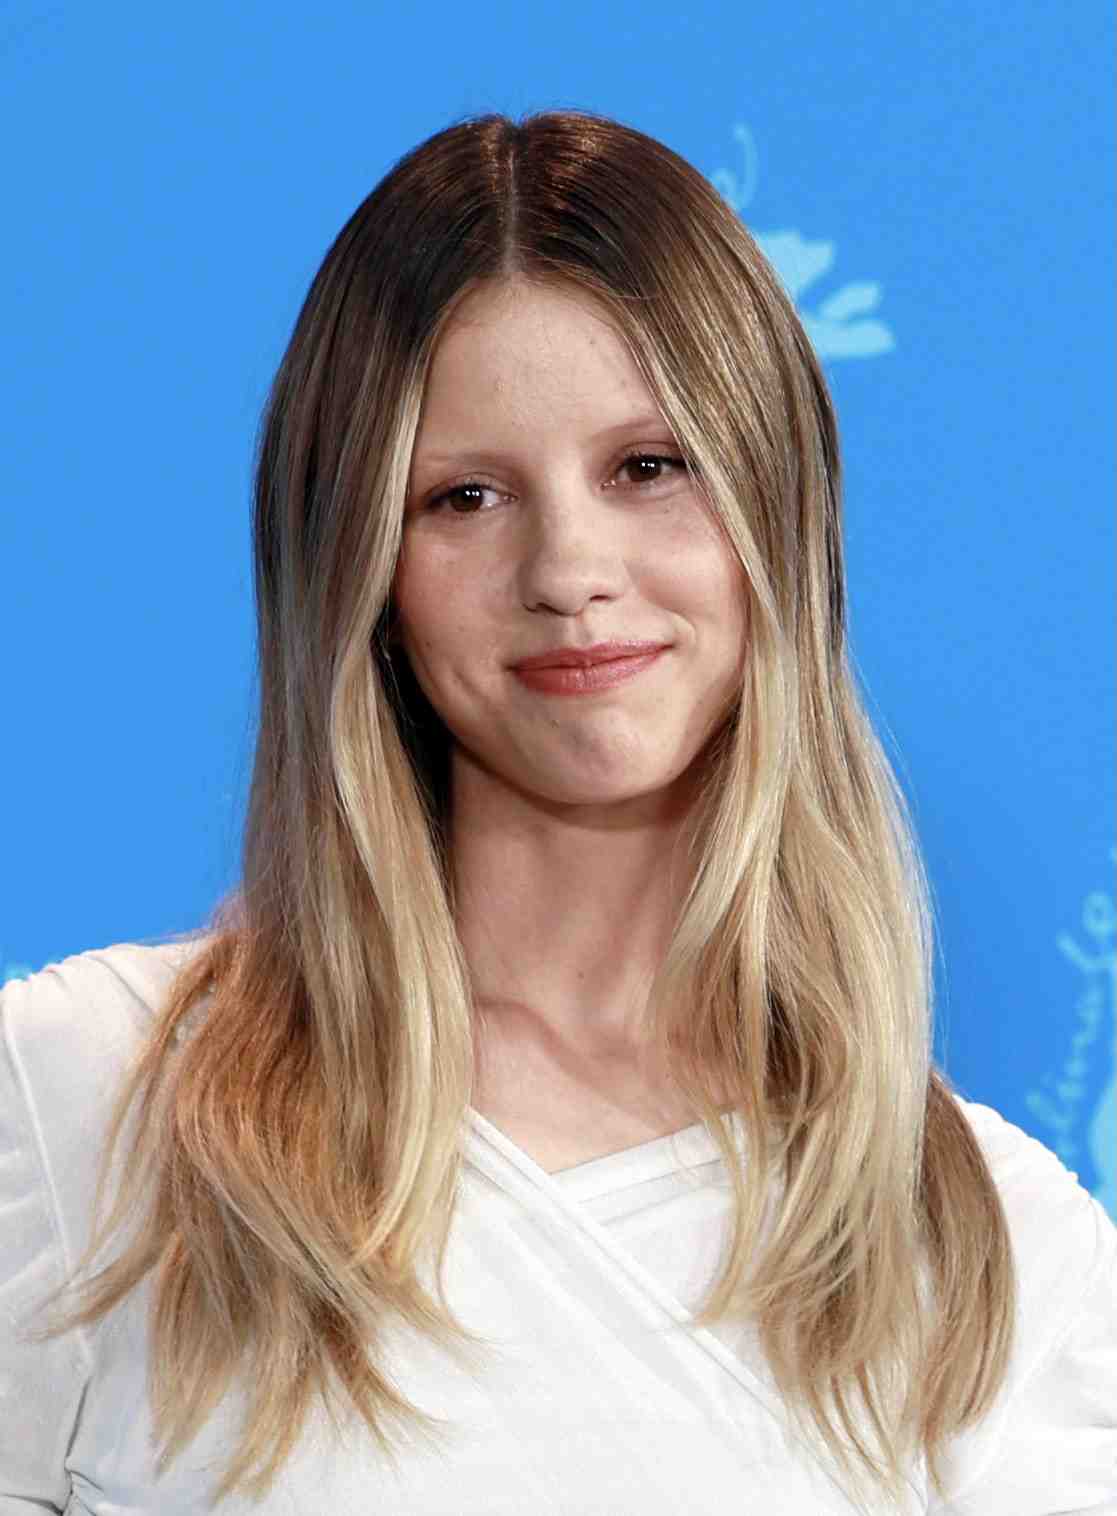 Caught between scandal and speculation, "Mia Goth nude" stokes the fires of curiosity. Are these provocative pixels genuine? Or has AI played a nefarious hand in the cyber shadows? You decide.